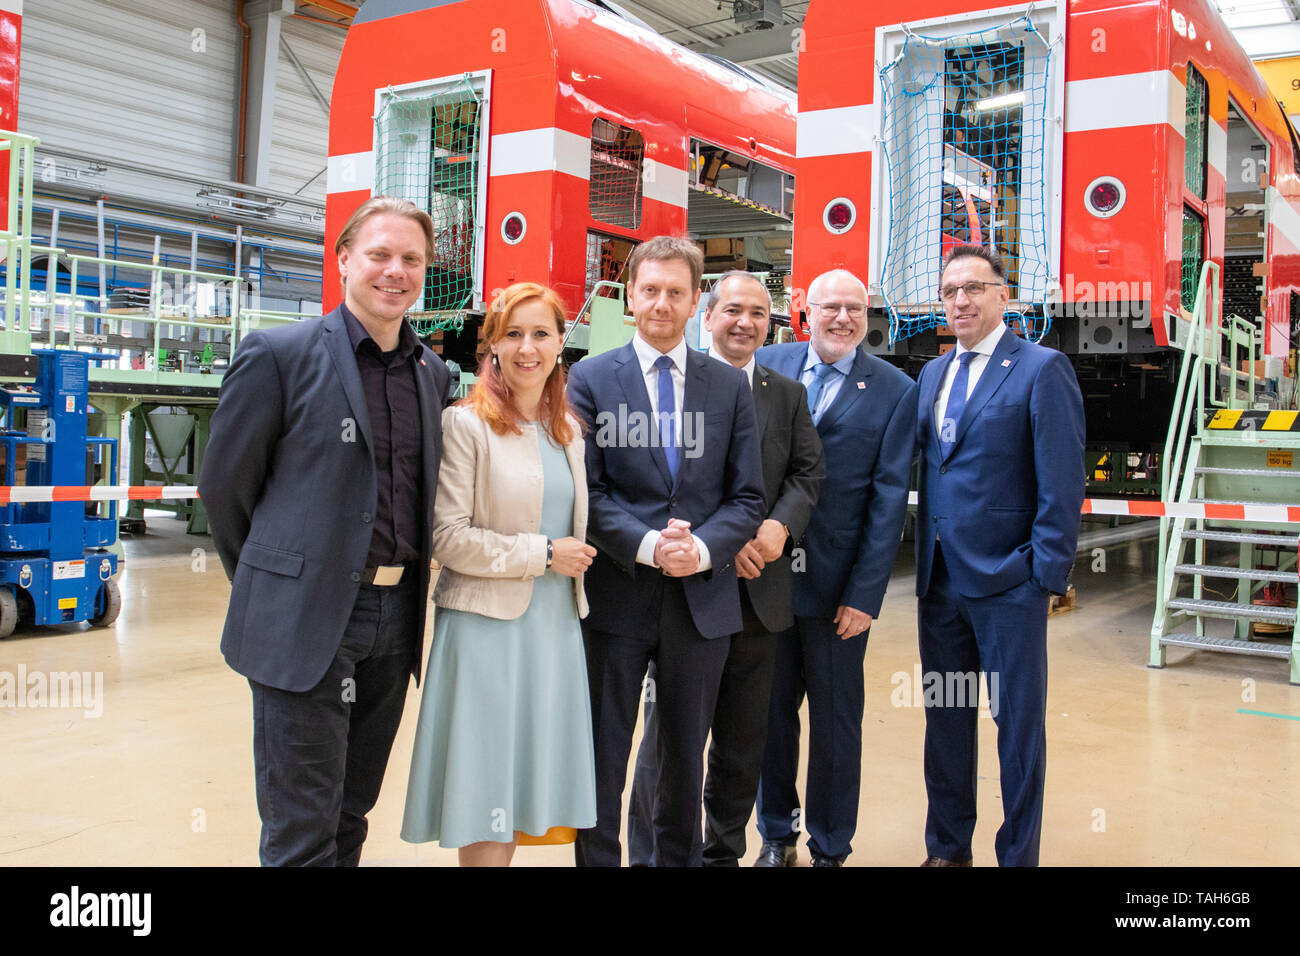 Görlitz, Germany, May 25, 2019 - Saxony's Prime Minister Michael Kretschmer (center) on a factory tour of the Bombardier plant in Görlitz on the occasion of the jubilee 170 years of waggon construction in Görlitz. Stock Photo